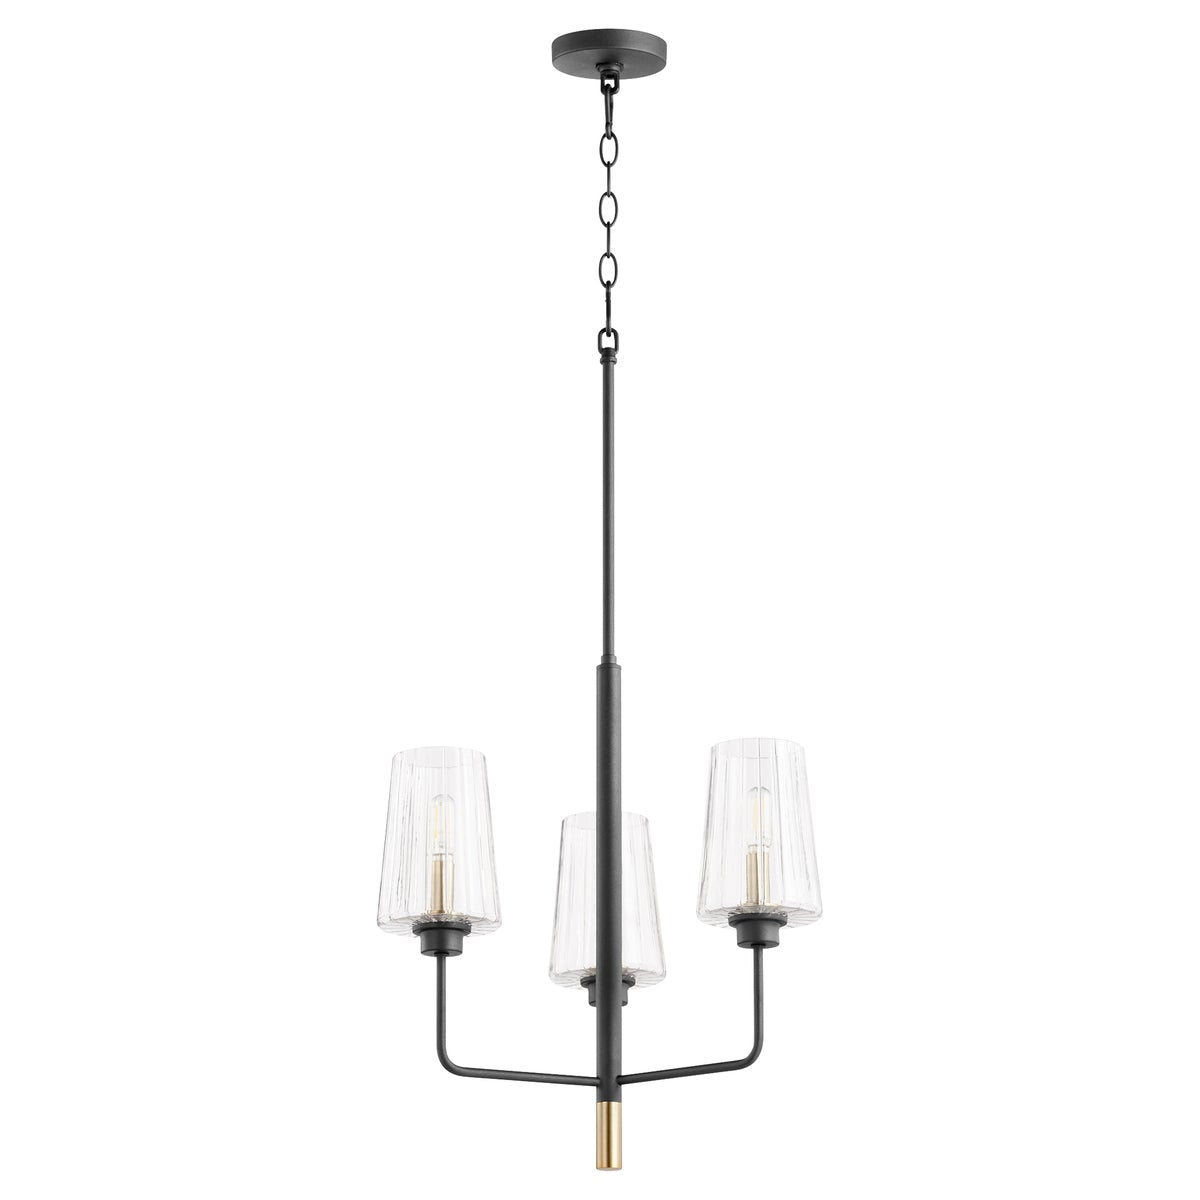 Bathroom chandelier with three clear glass shades, tulip-shaped and fluted. Minimalist-inspired design with aged brass and noir finish. Suitable for bathrooms, outdoor kitchens, and covered patios. Adjustable chain/stem hung suspension system.